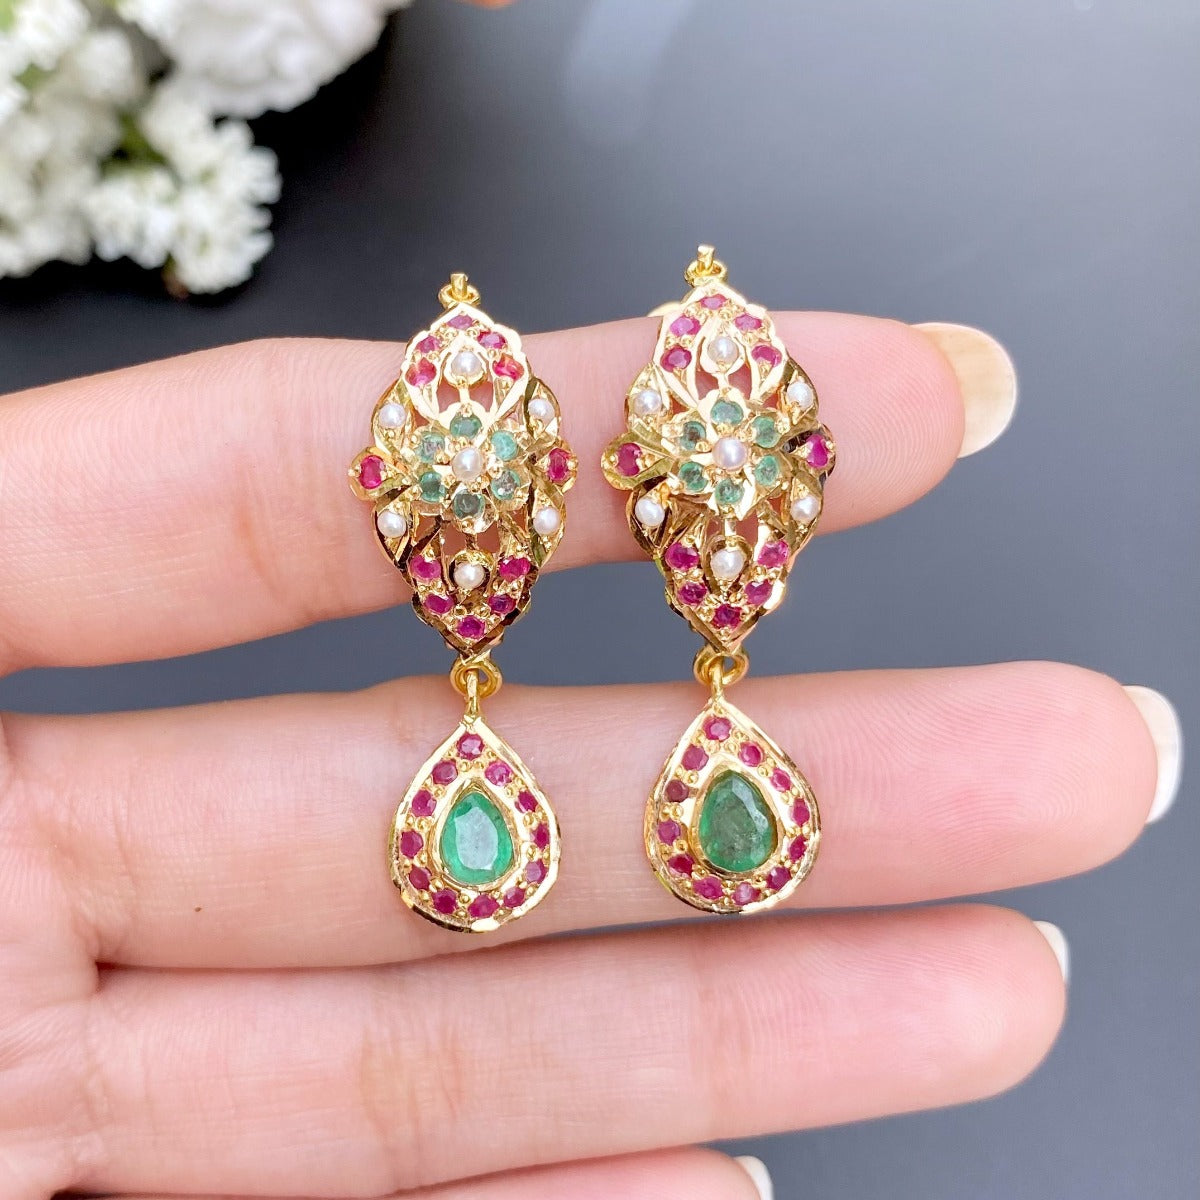 22k gold hoop earrings studded with ruby emerald